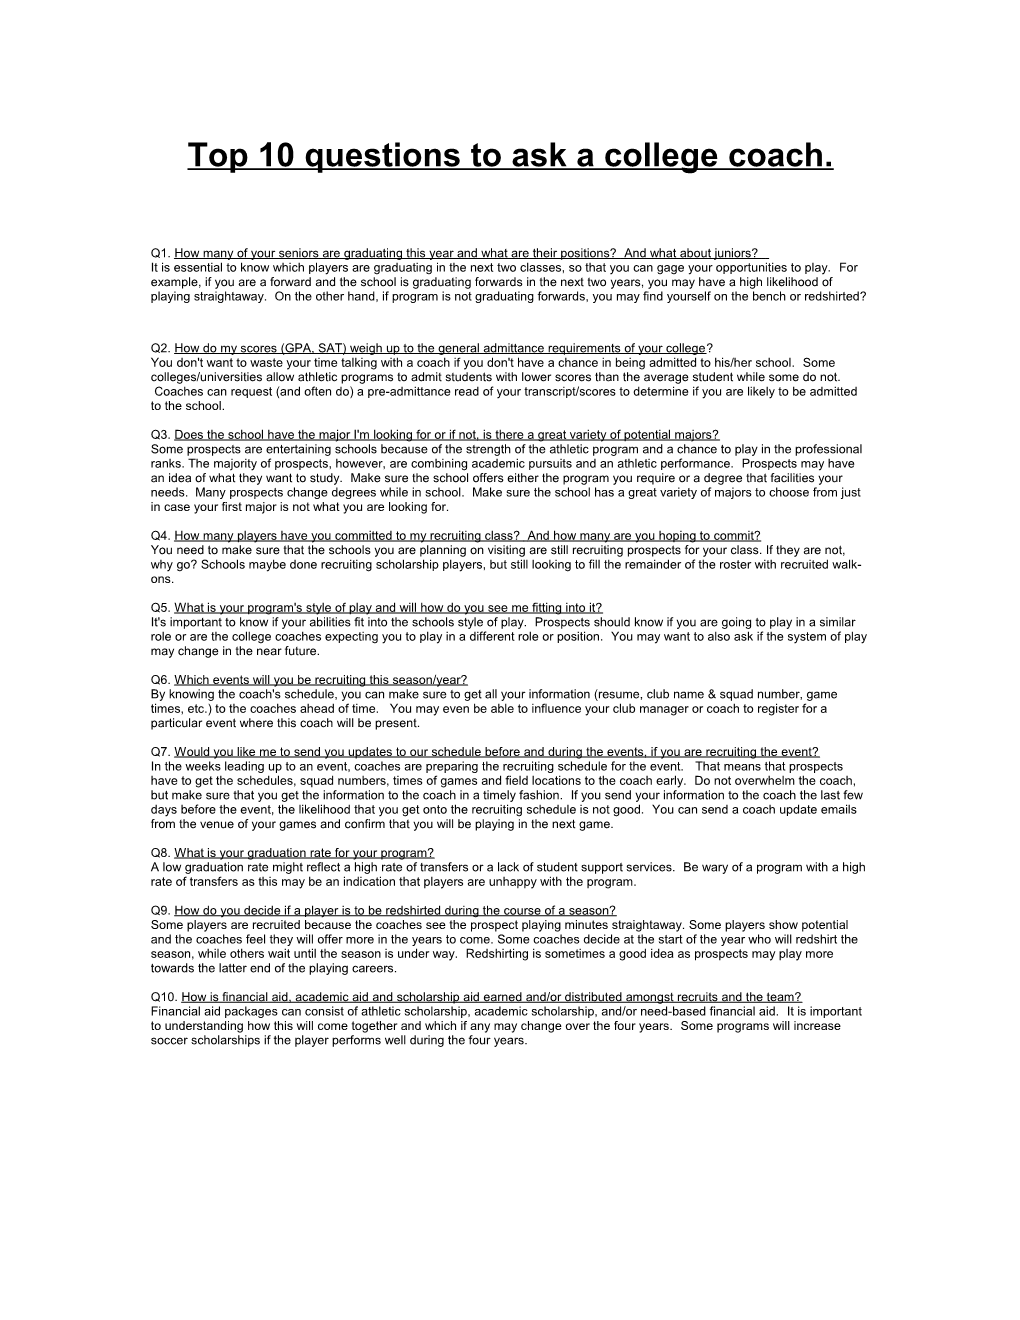 Top 10 Questions to Ask a College Coach